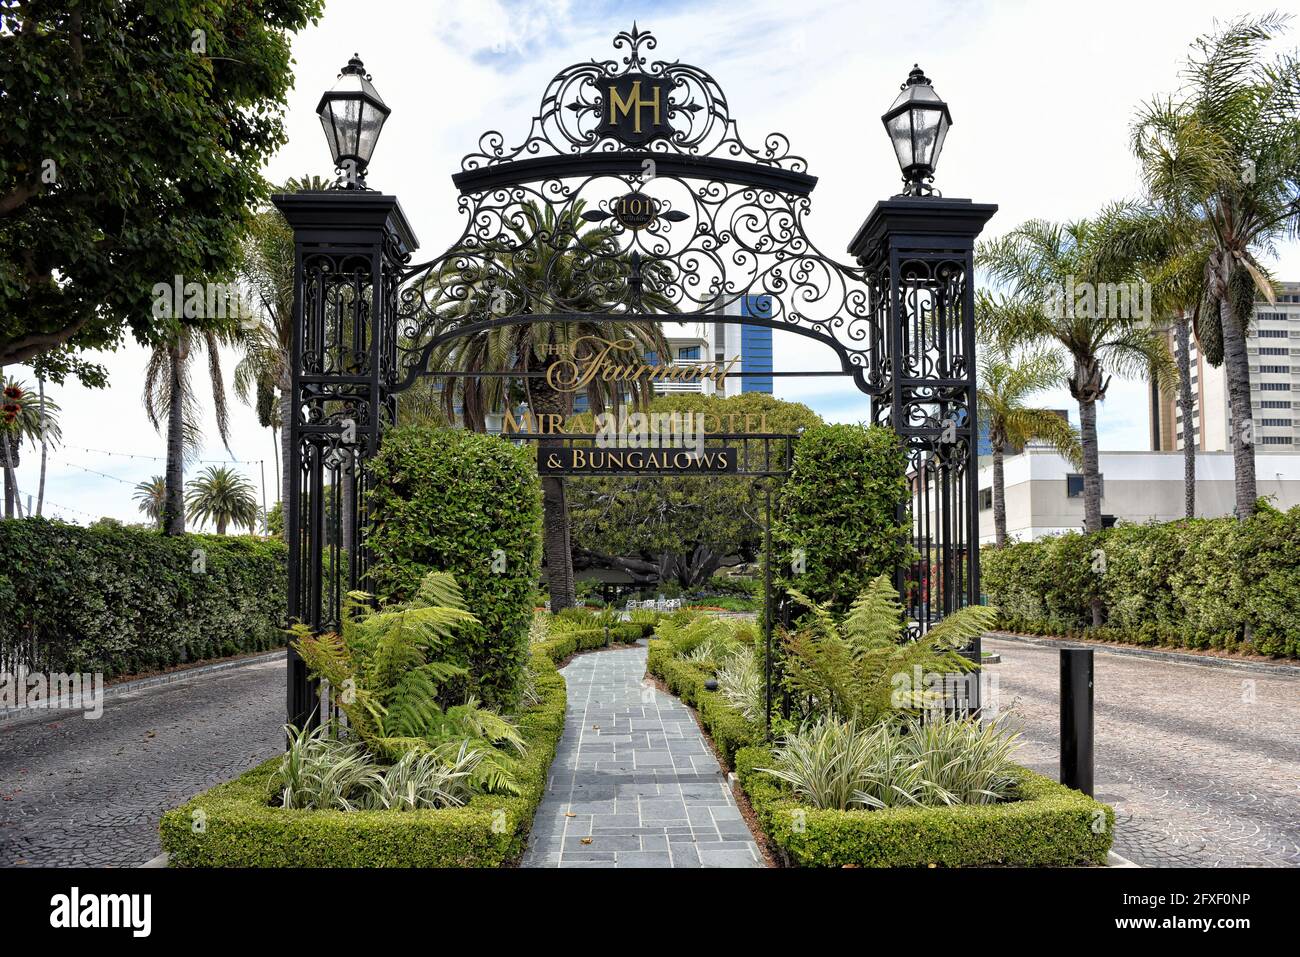 SANTA MONICA, CALIFORNIA - 25 MAY 2021: Fairmont Miramar Hotel and Bungalows is a historic five-star hotel located near the beach, not far from the Sa Stock Photo